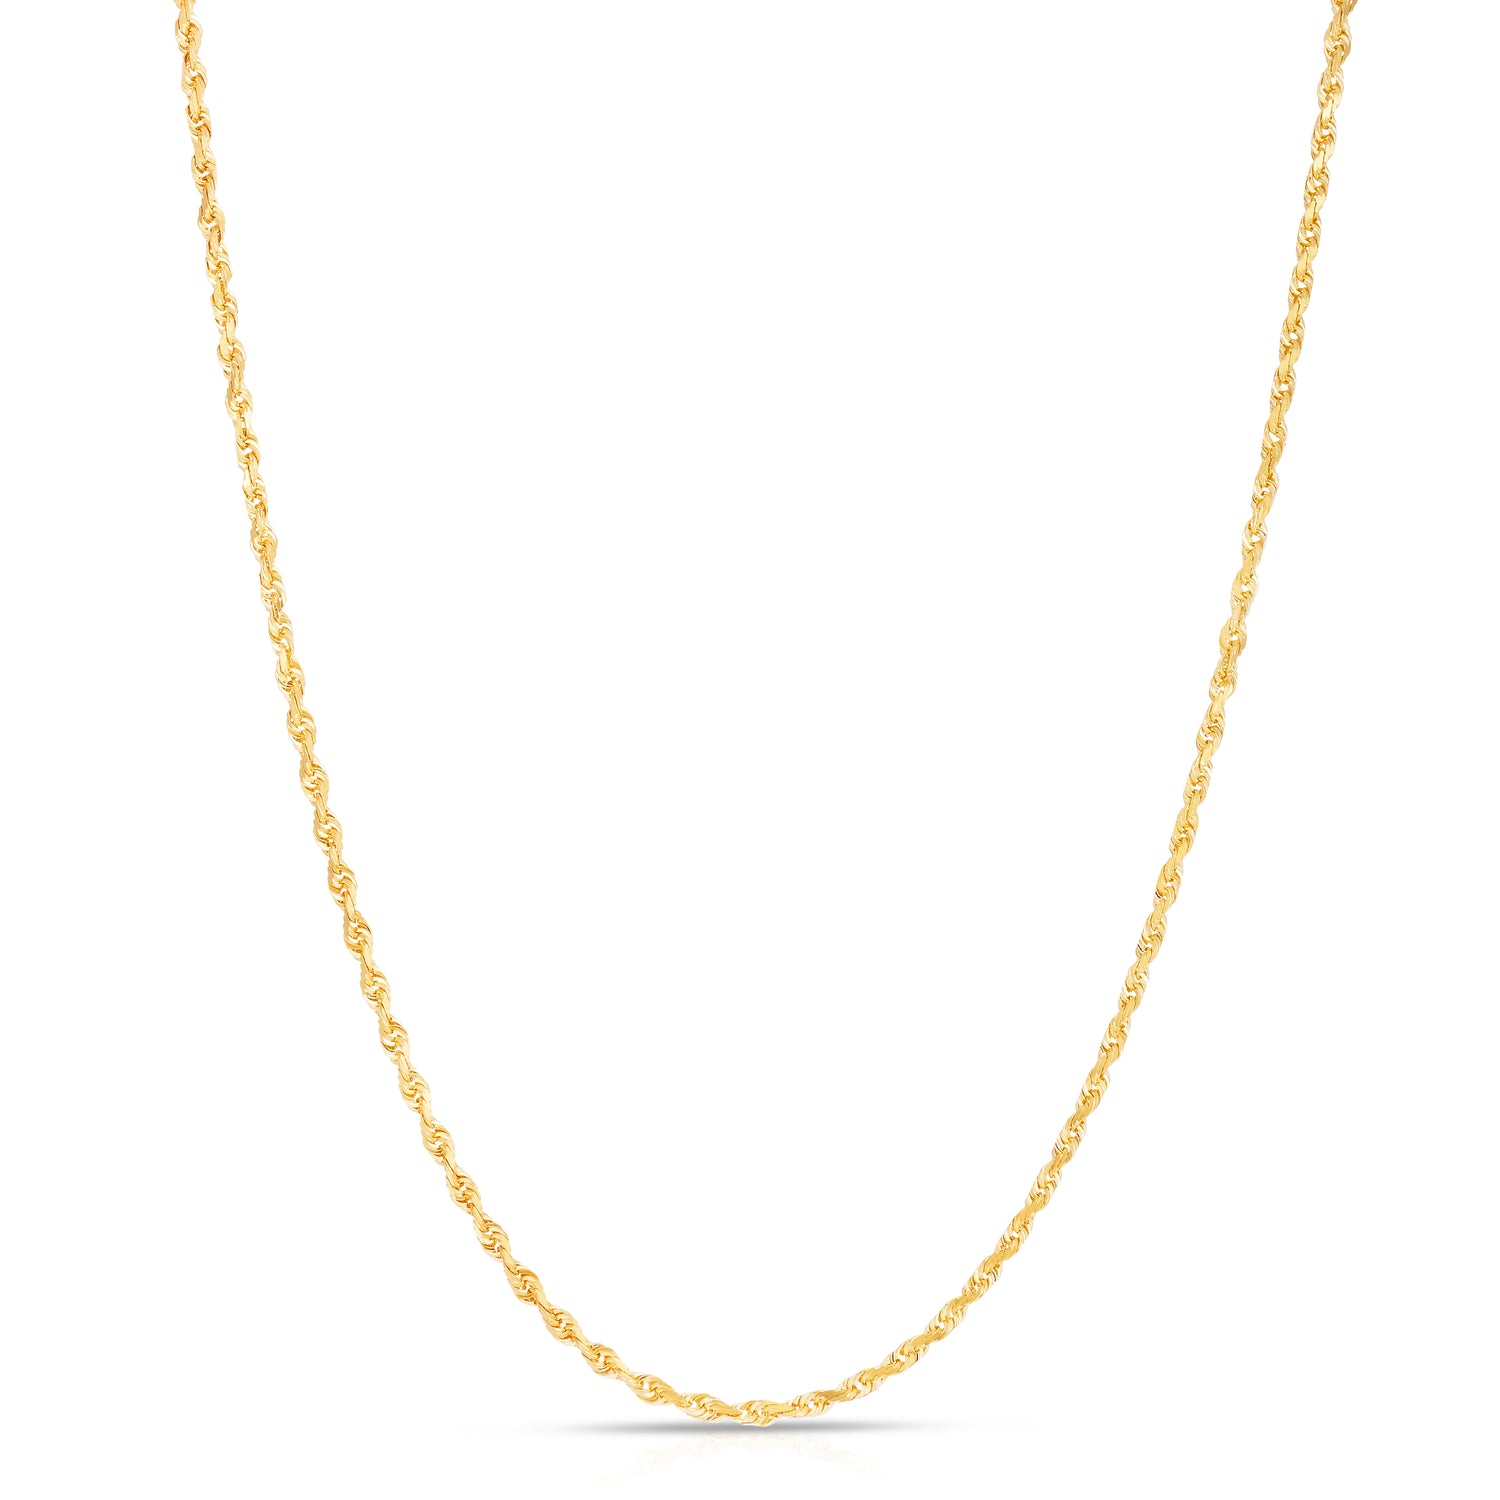 10k Yellow Gold 2.5mm Solid Diamond Cut Rope Chain Necklace